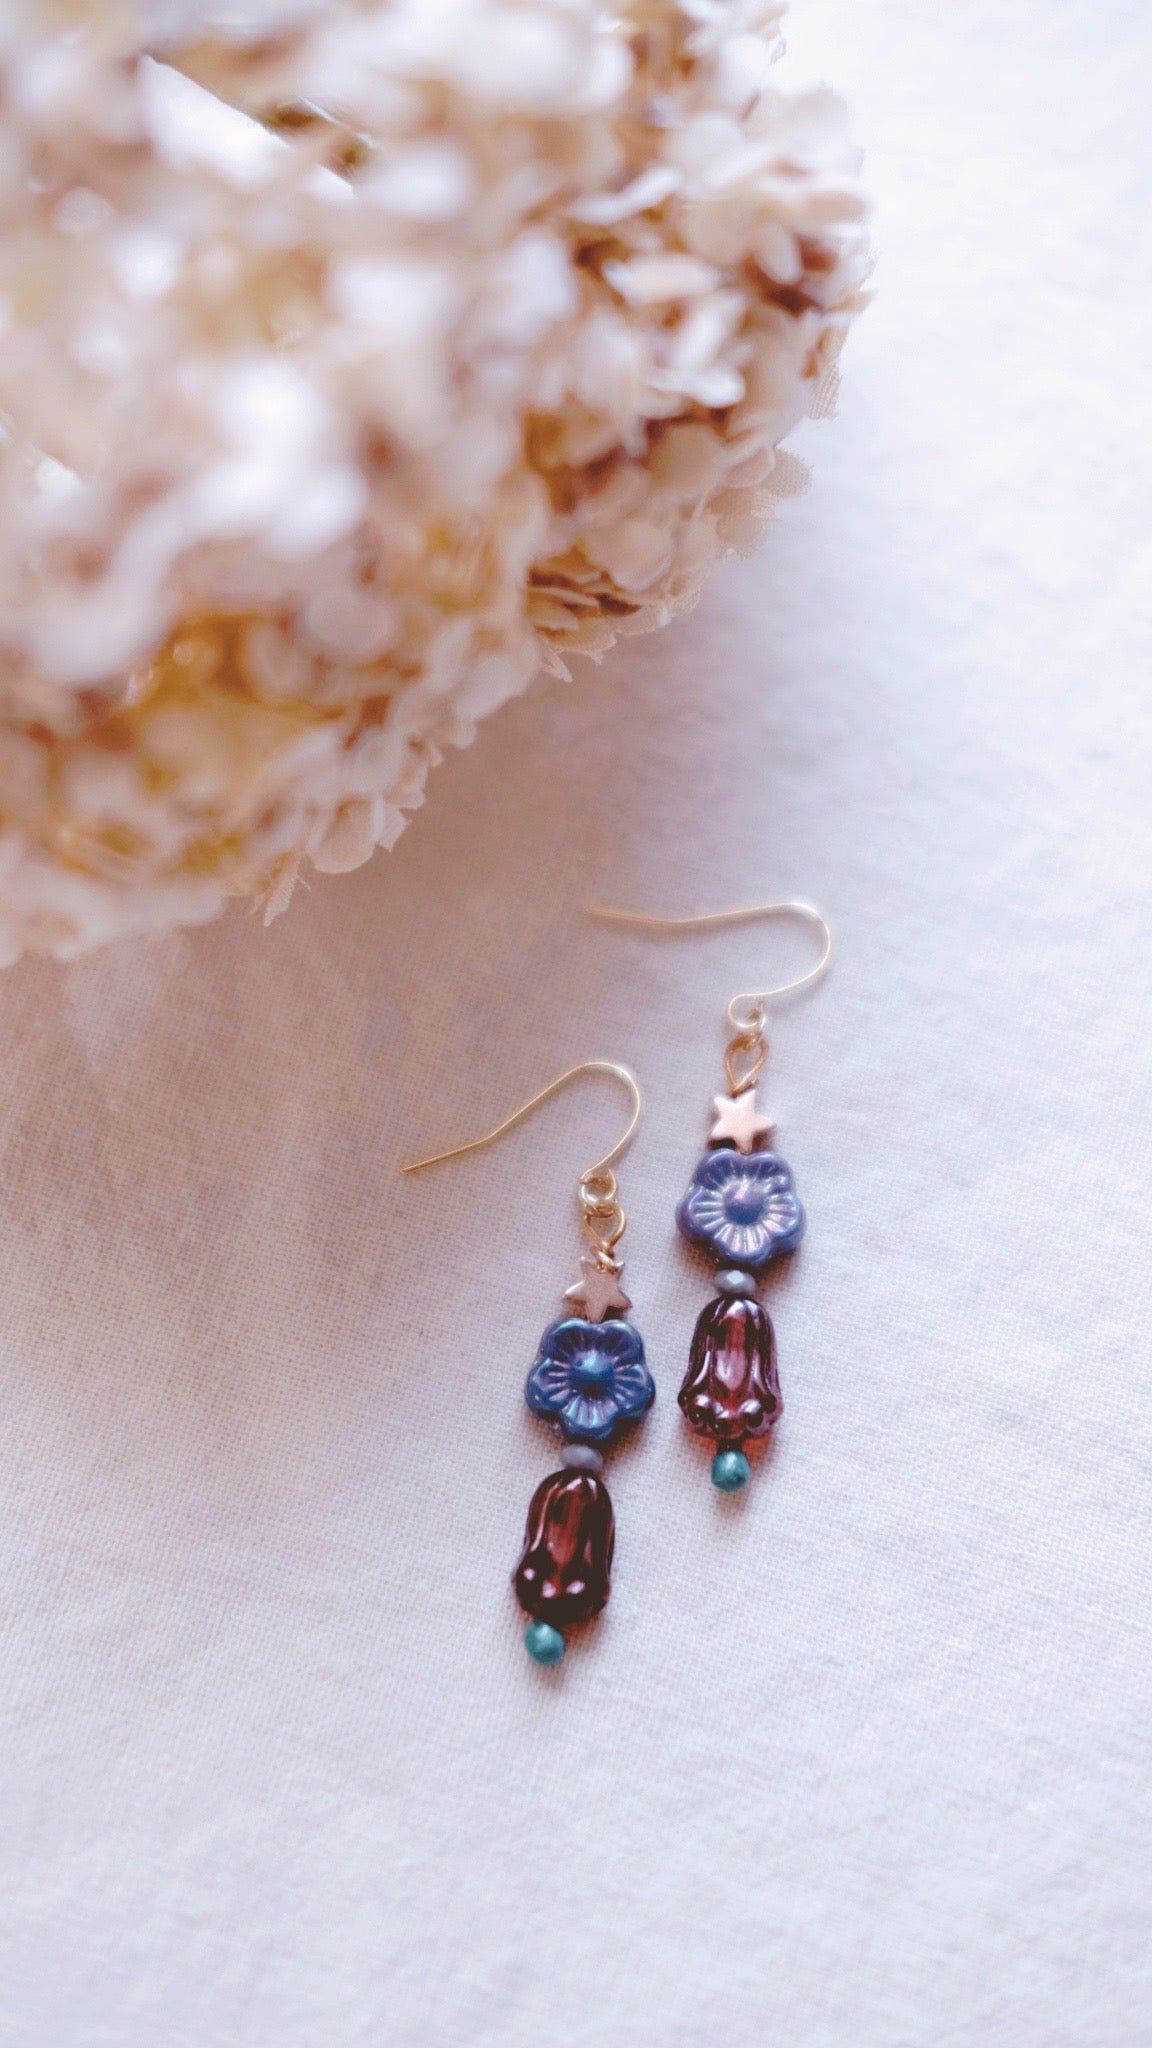 Star Lanterns + Pressed flowers, Chalcedony, and Ruby Glass earrings